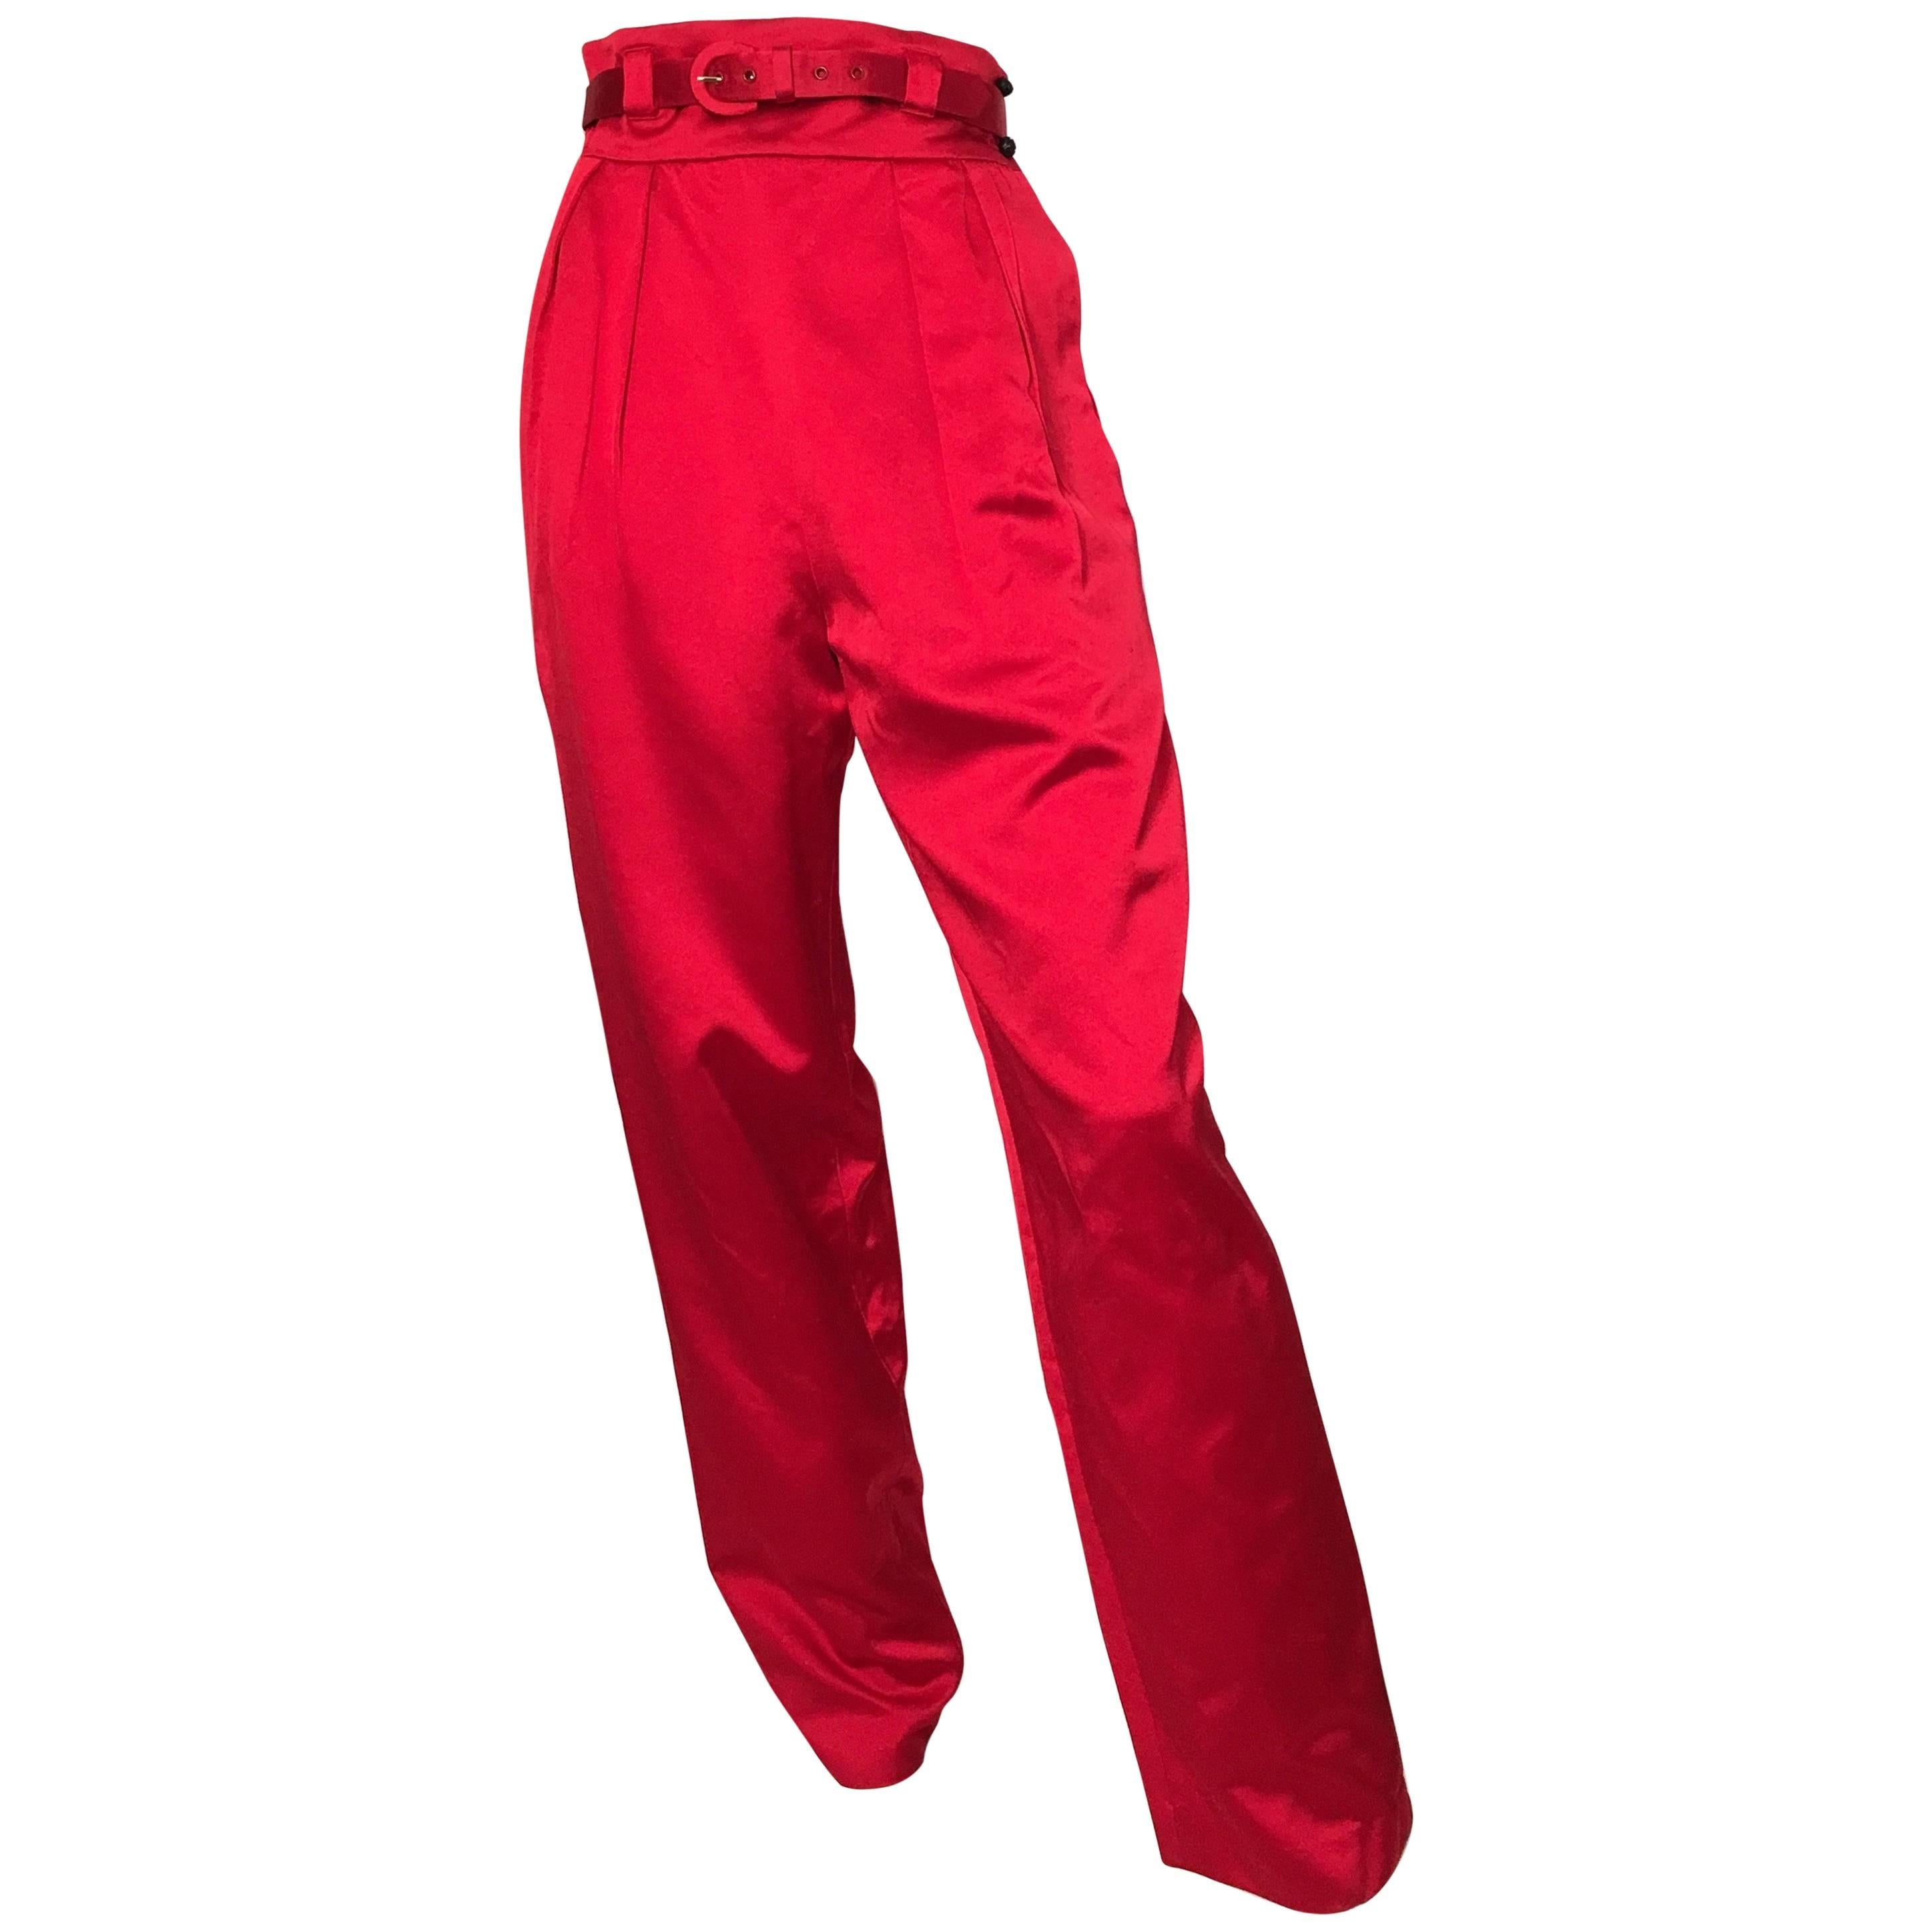 Bill Blass Red Satin Pleated Evening Pants with Pockets Size 4. For Sale